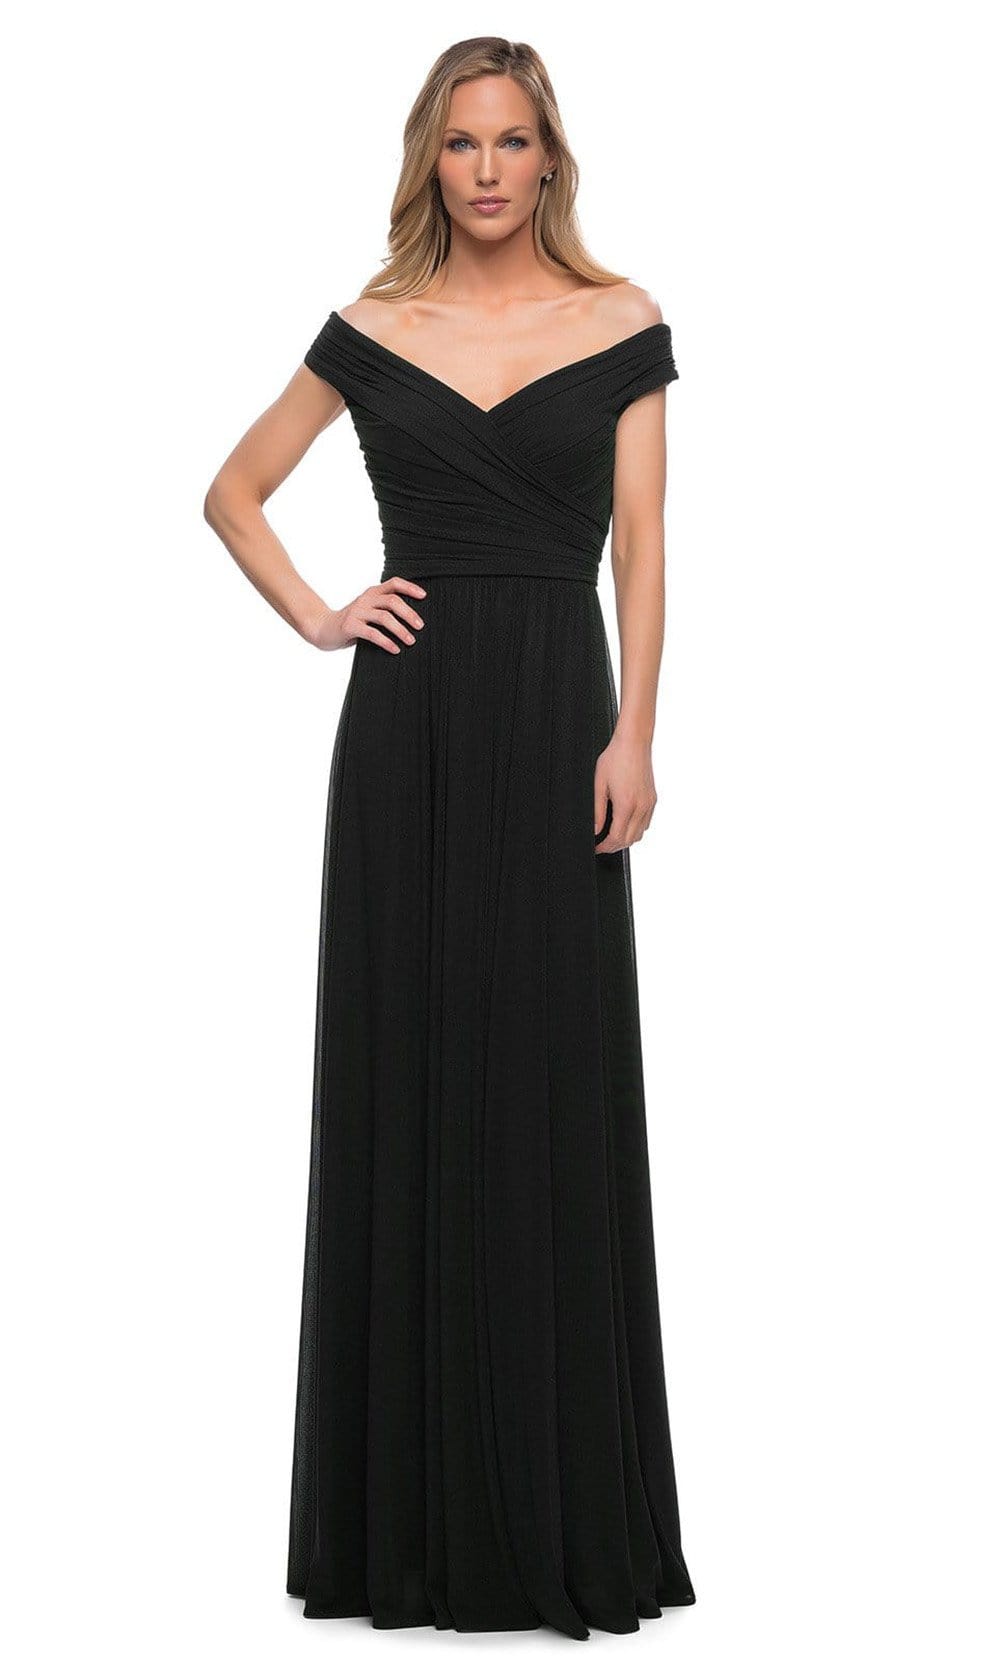 La Femme - Off Shoulder Ruched Evening Dress 29168SC - 1 pc Wine In Size 14 Available CCSALE 14 / Wine